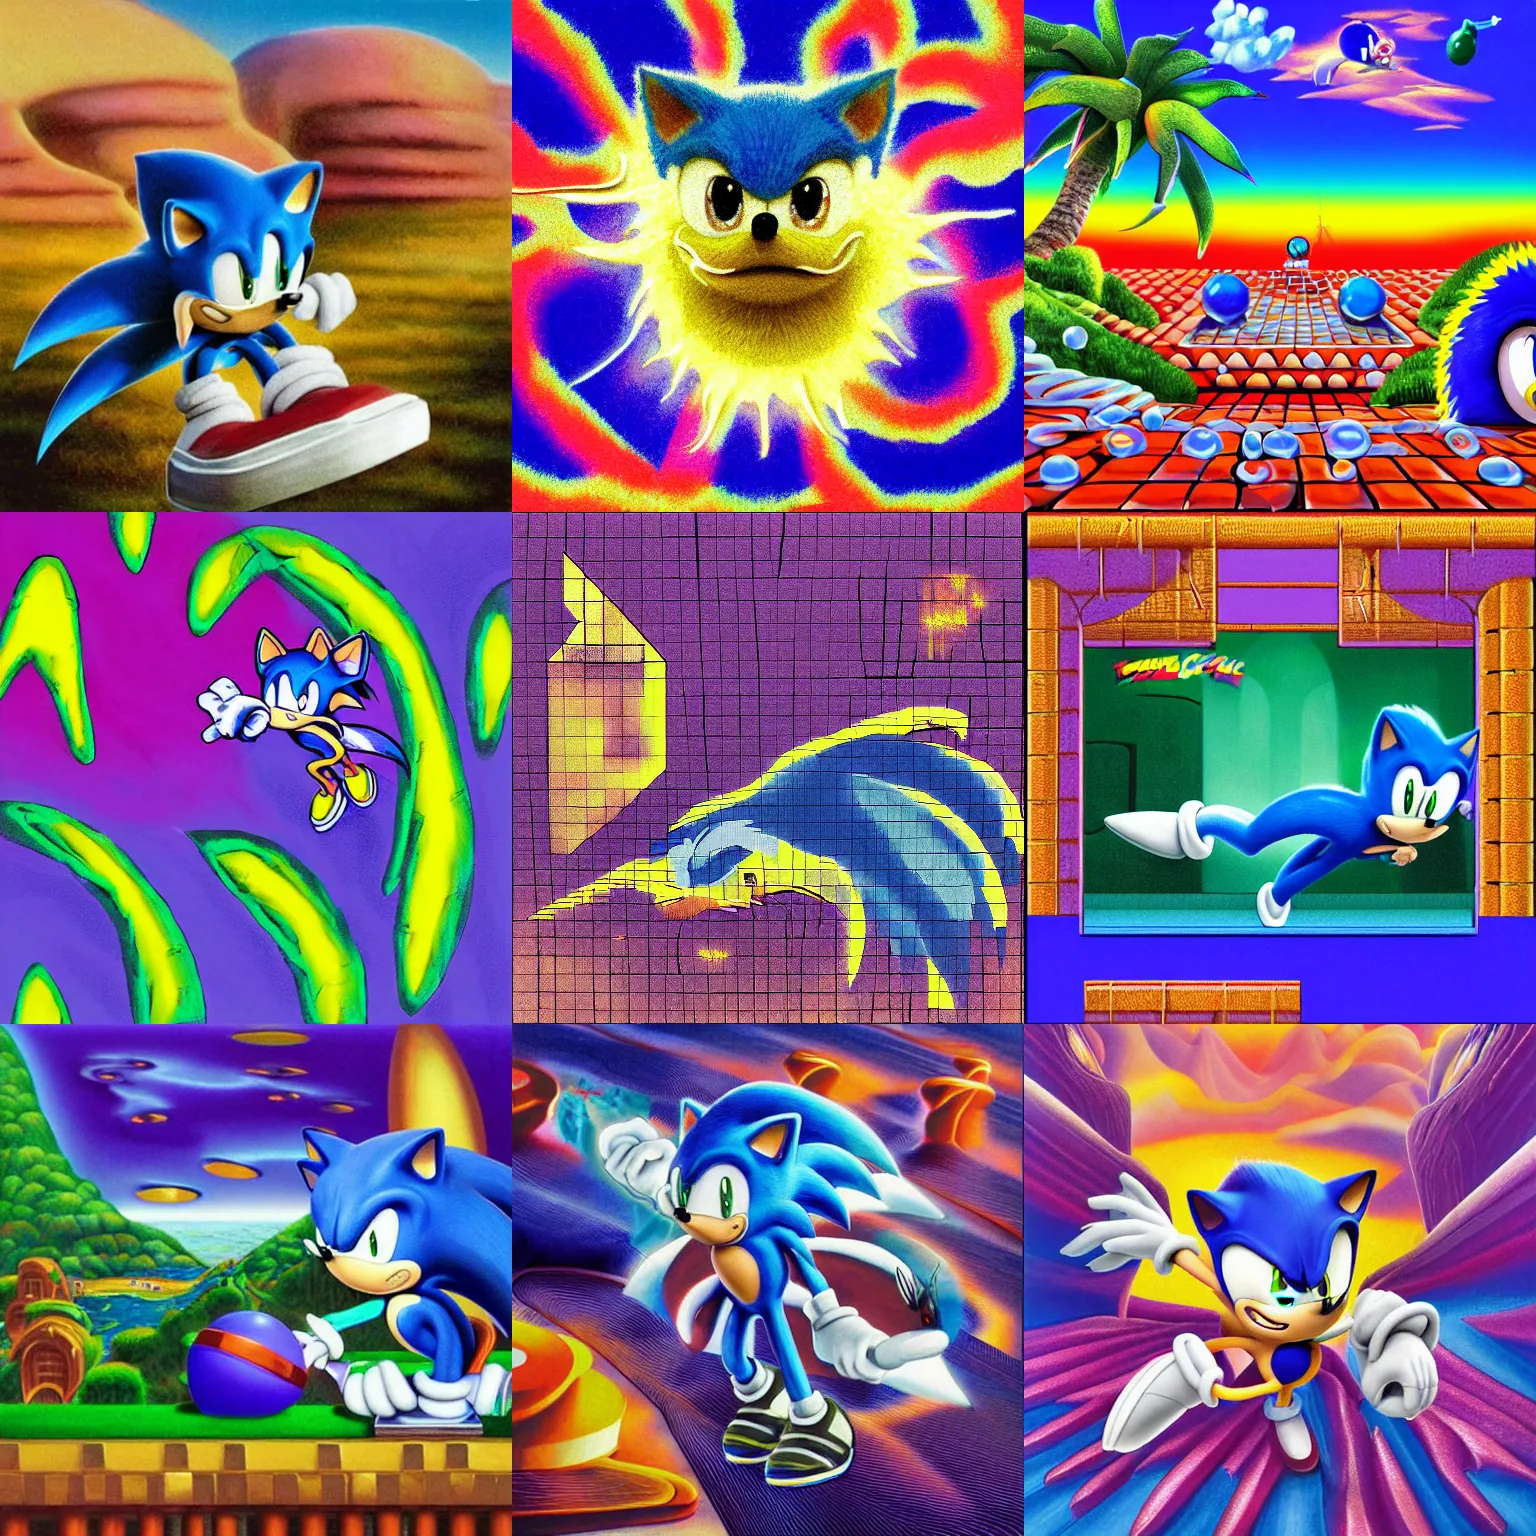 Prompt: cryptic portrait of sonic hedgehog and a matte painting landscape of a surreal, sharp, detailed professional, soft pastels, high quality airbrush art album cover of a liquid dissolving airbrush art lsd dmt sonic the hedgehog swimming through cyberspace, purple checkerboard background, 1 9 9 0 s 1 9 9 2 sega genesis rareware video game album cover